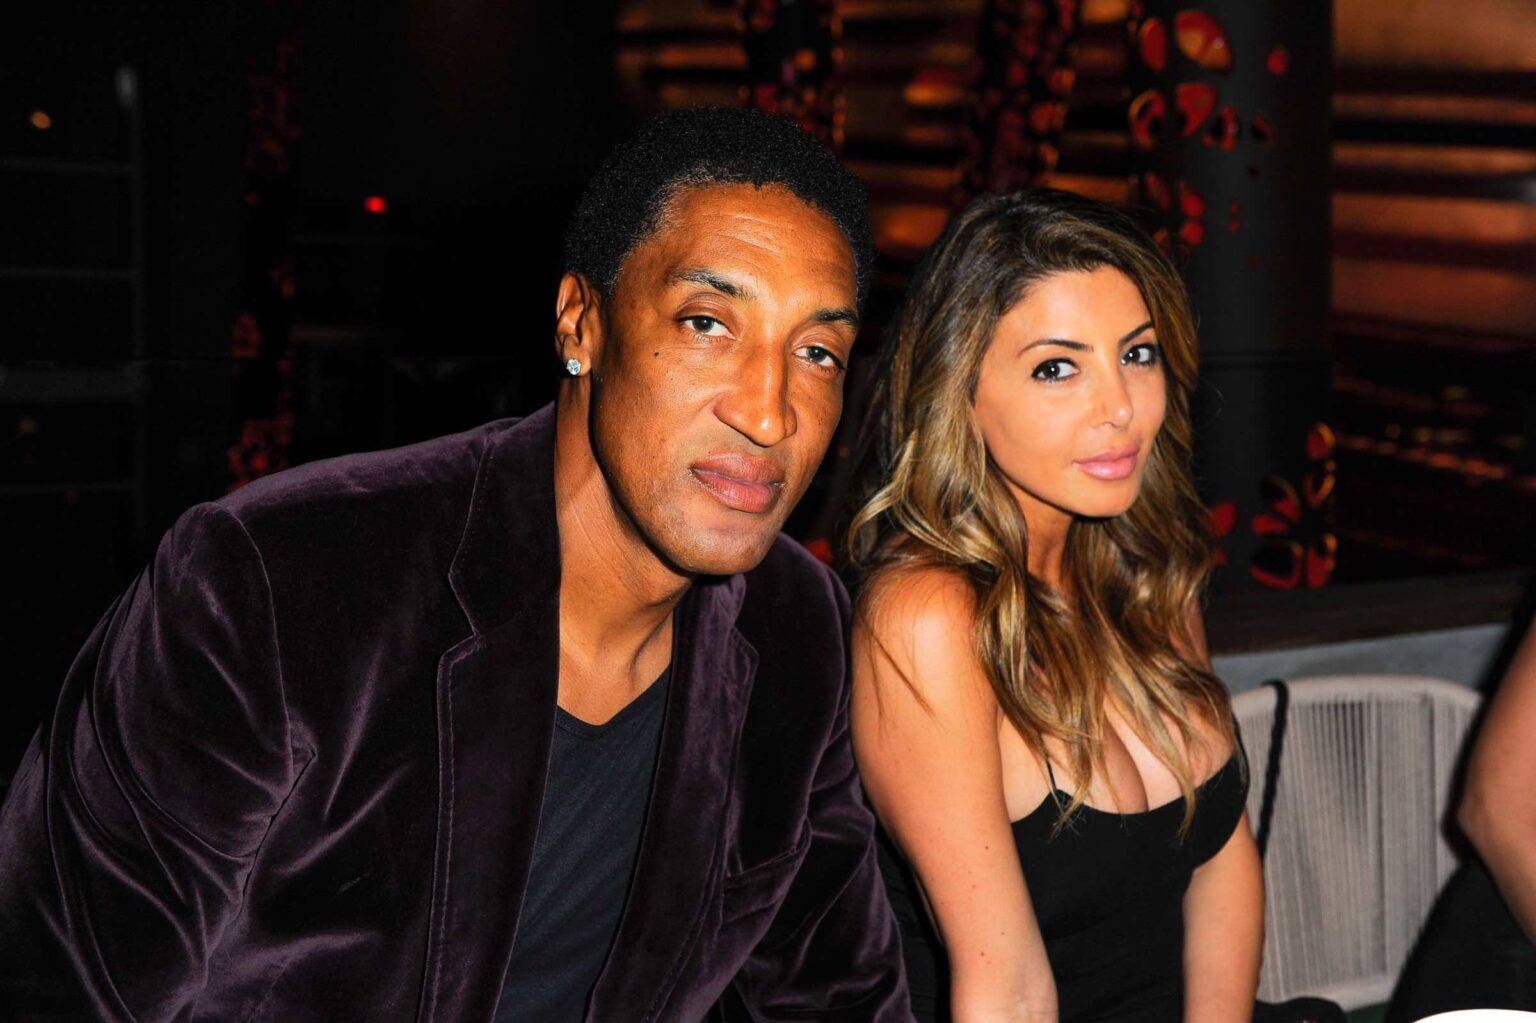 Larsa Pippen has been in the Kardashian’s family’s good graces for years. Here's what we know about the latest drama to unfold.